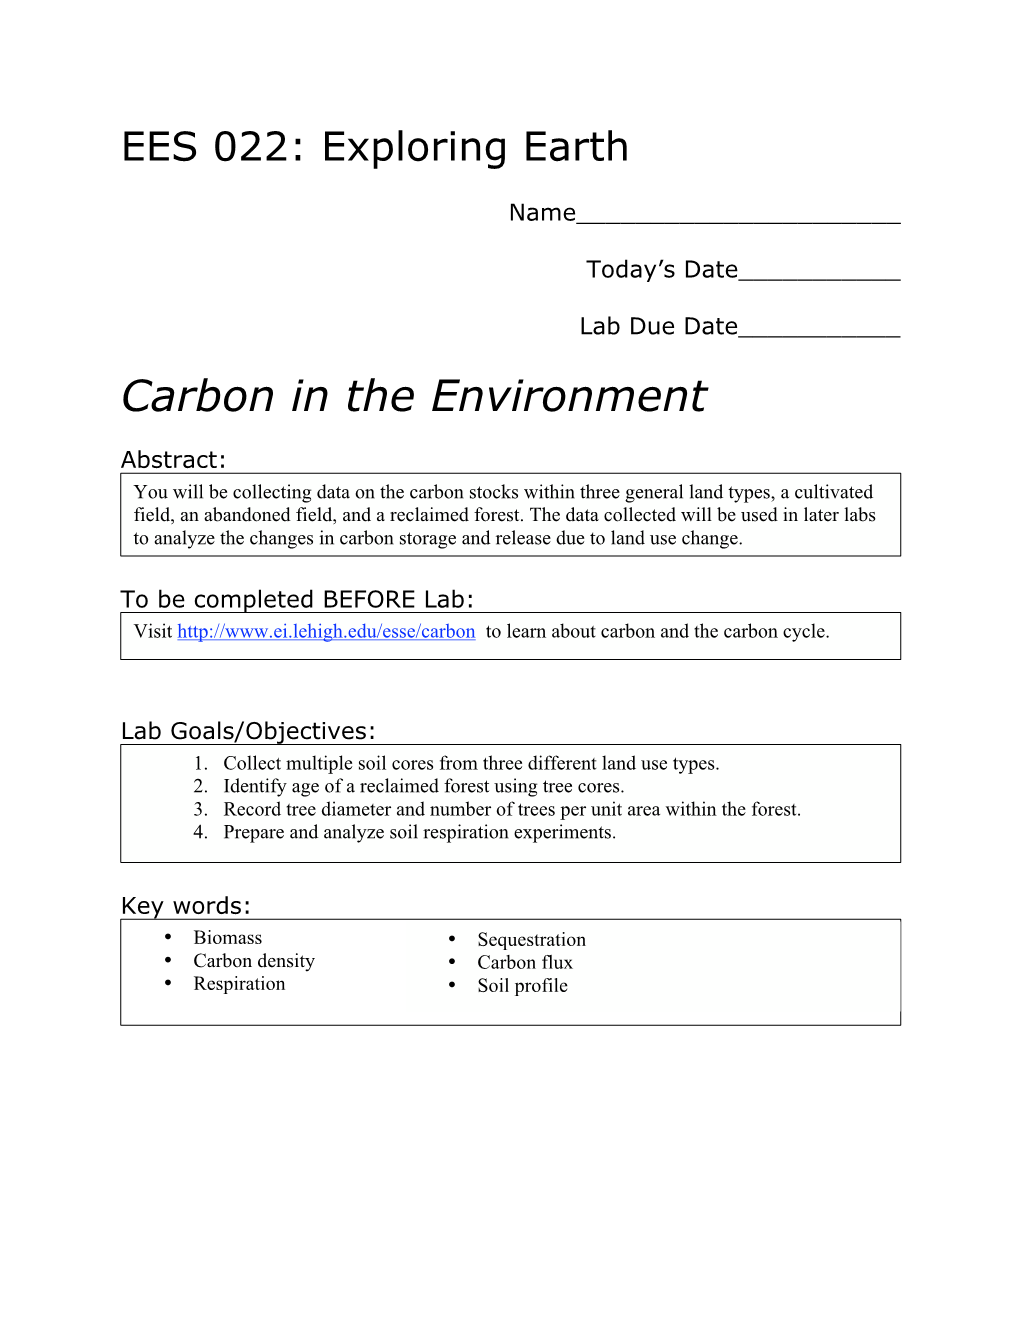 Carbon in the Environment